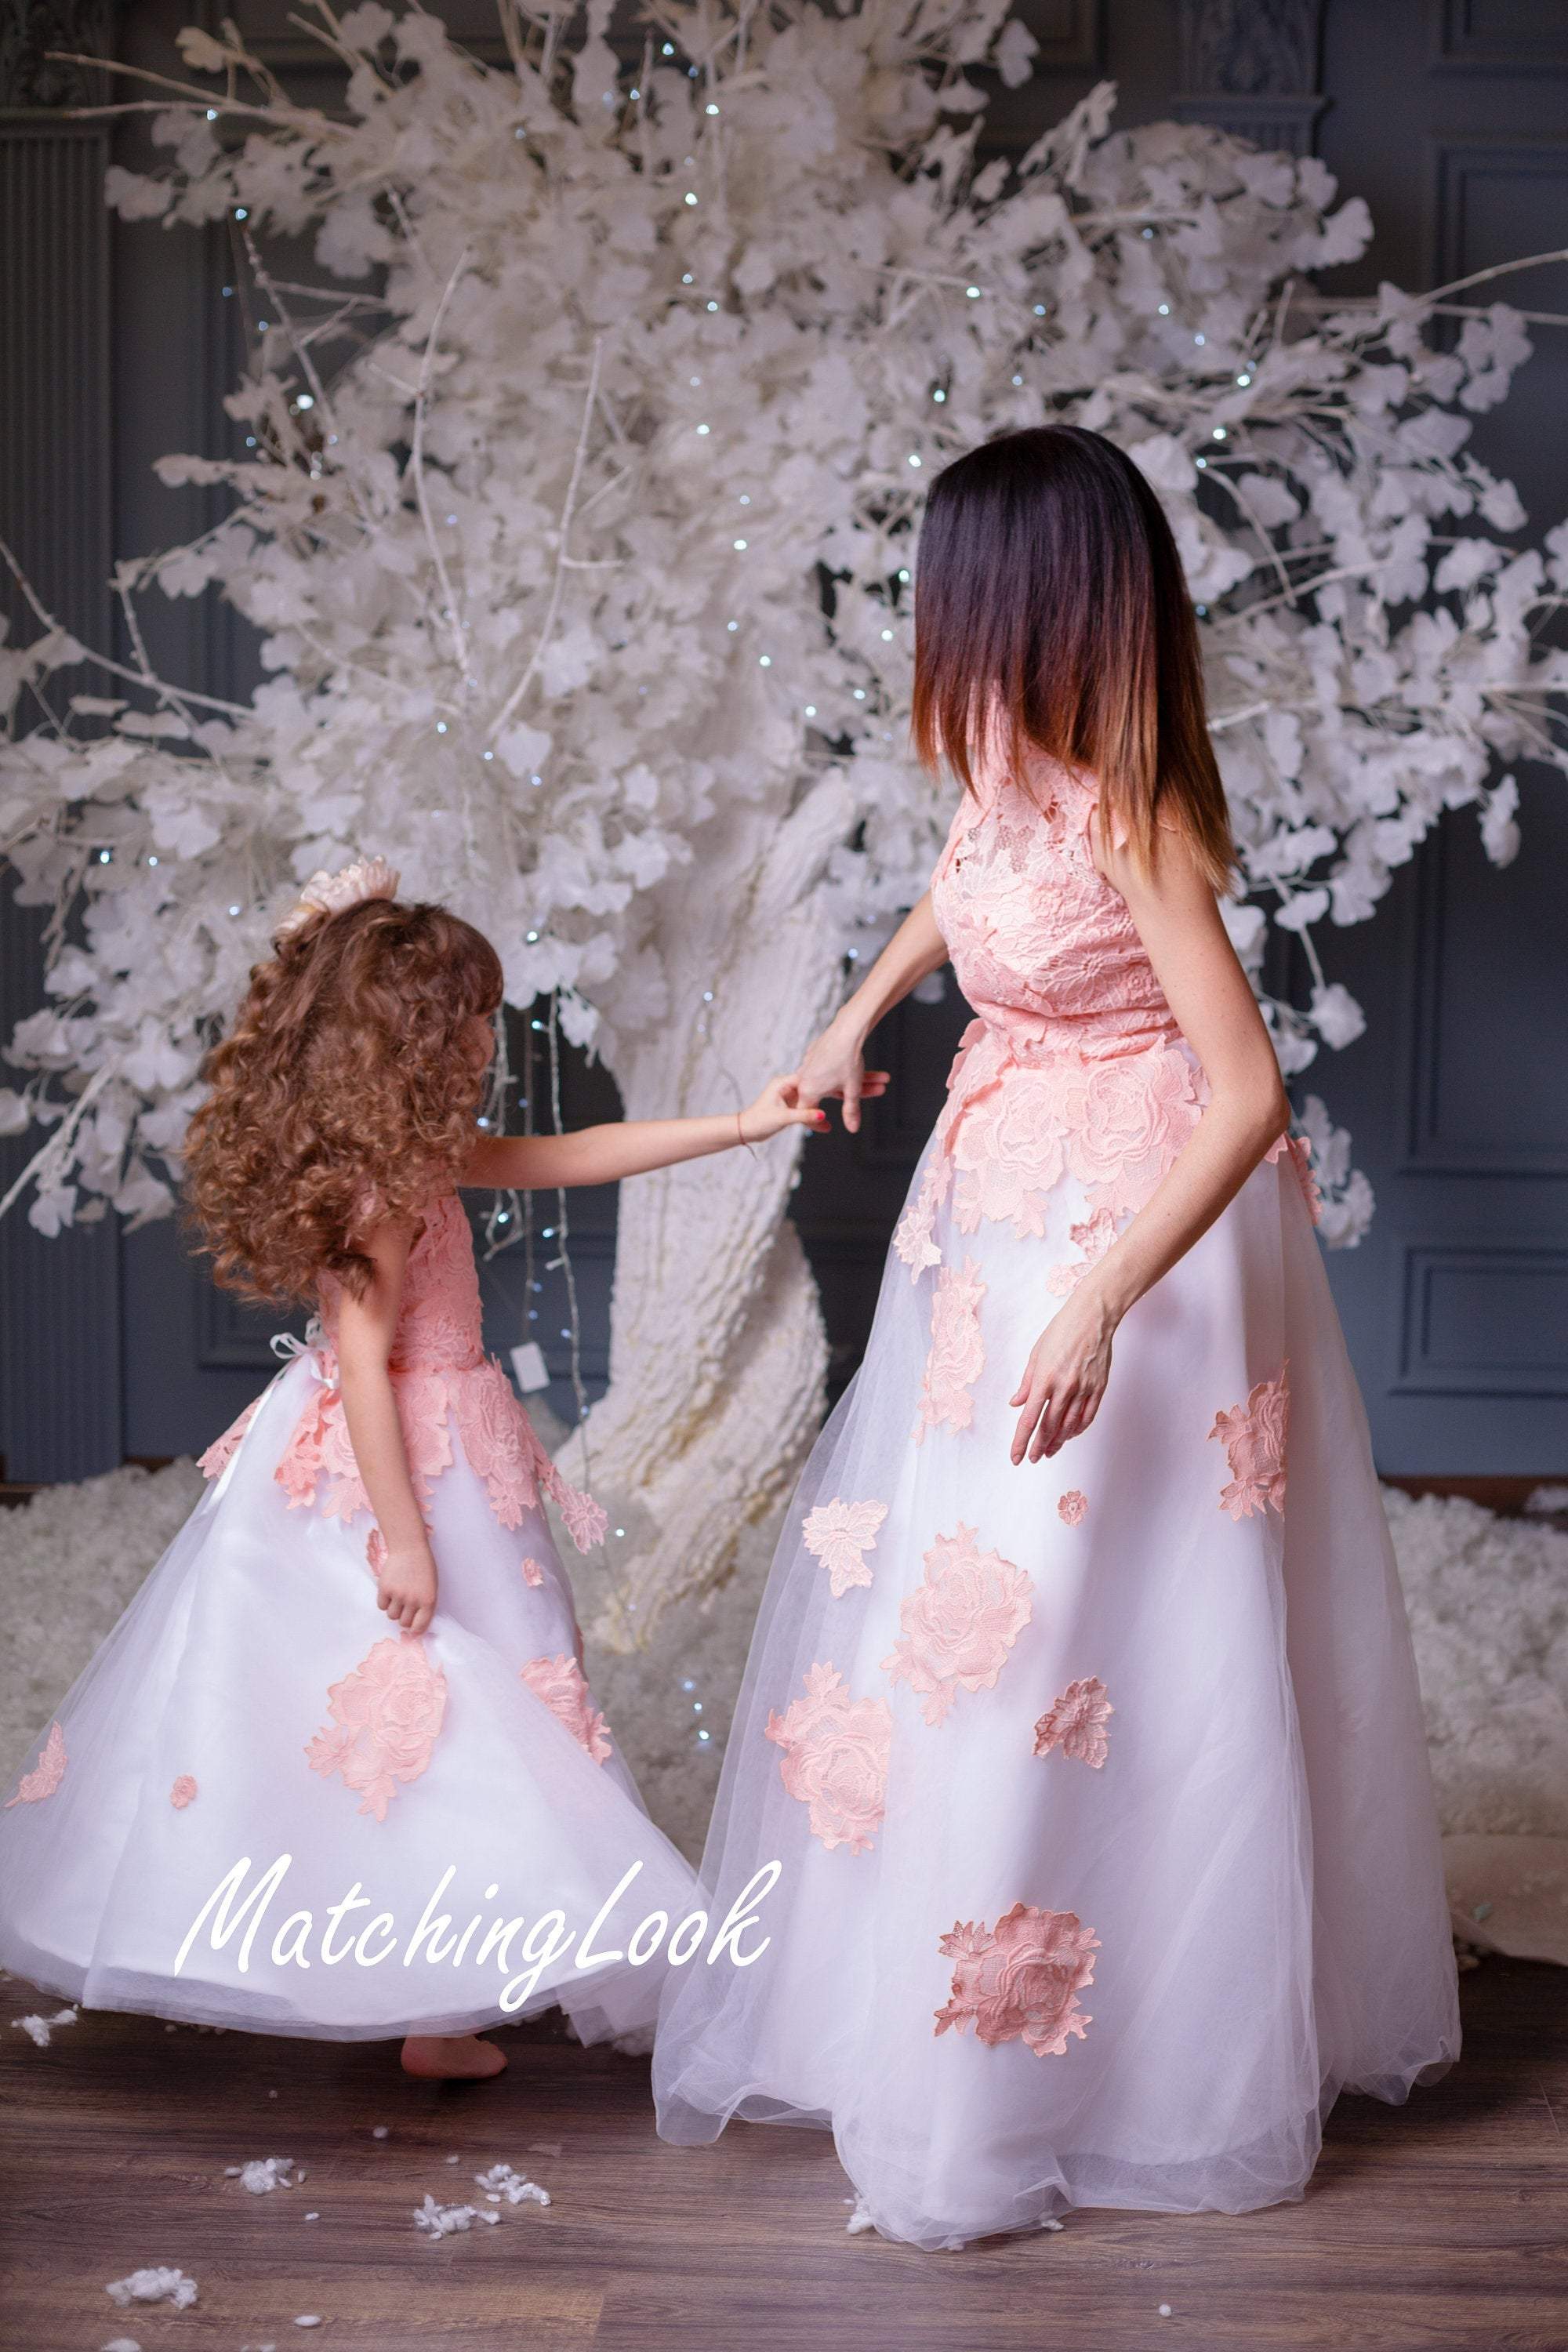 Mother Daughter Matching Dress, Birthday Dress for Woman, Matching Outfit,  First Birthday Dress for Photoshoot, Family Outfits for a Wedding - Etsy | Mother  daughter matching outfits, Mother daughter dresses matching, Mother